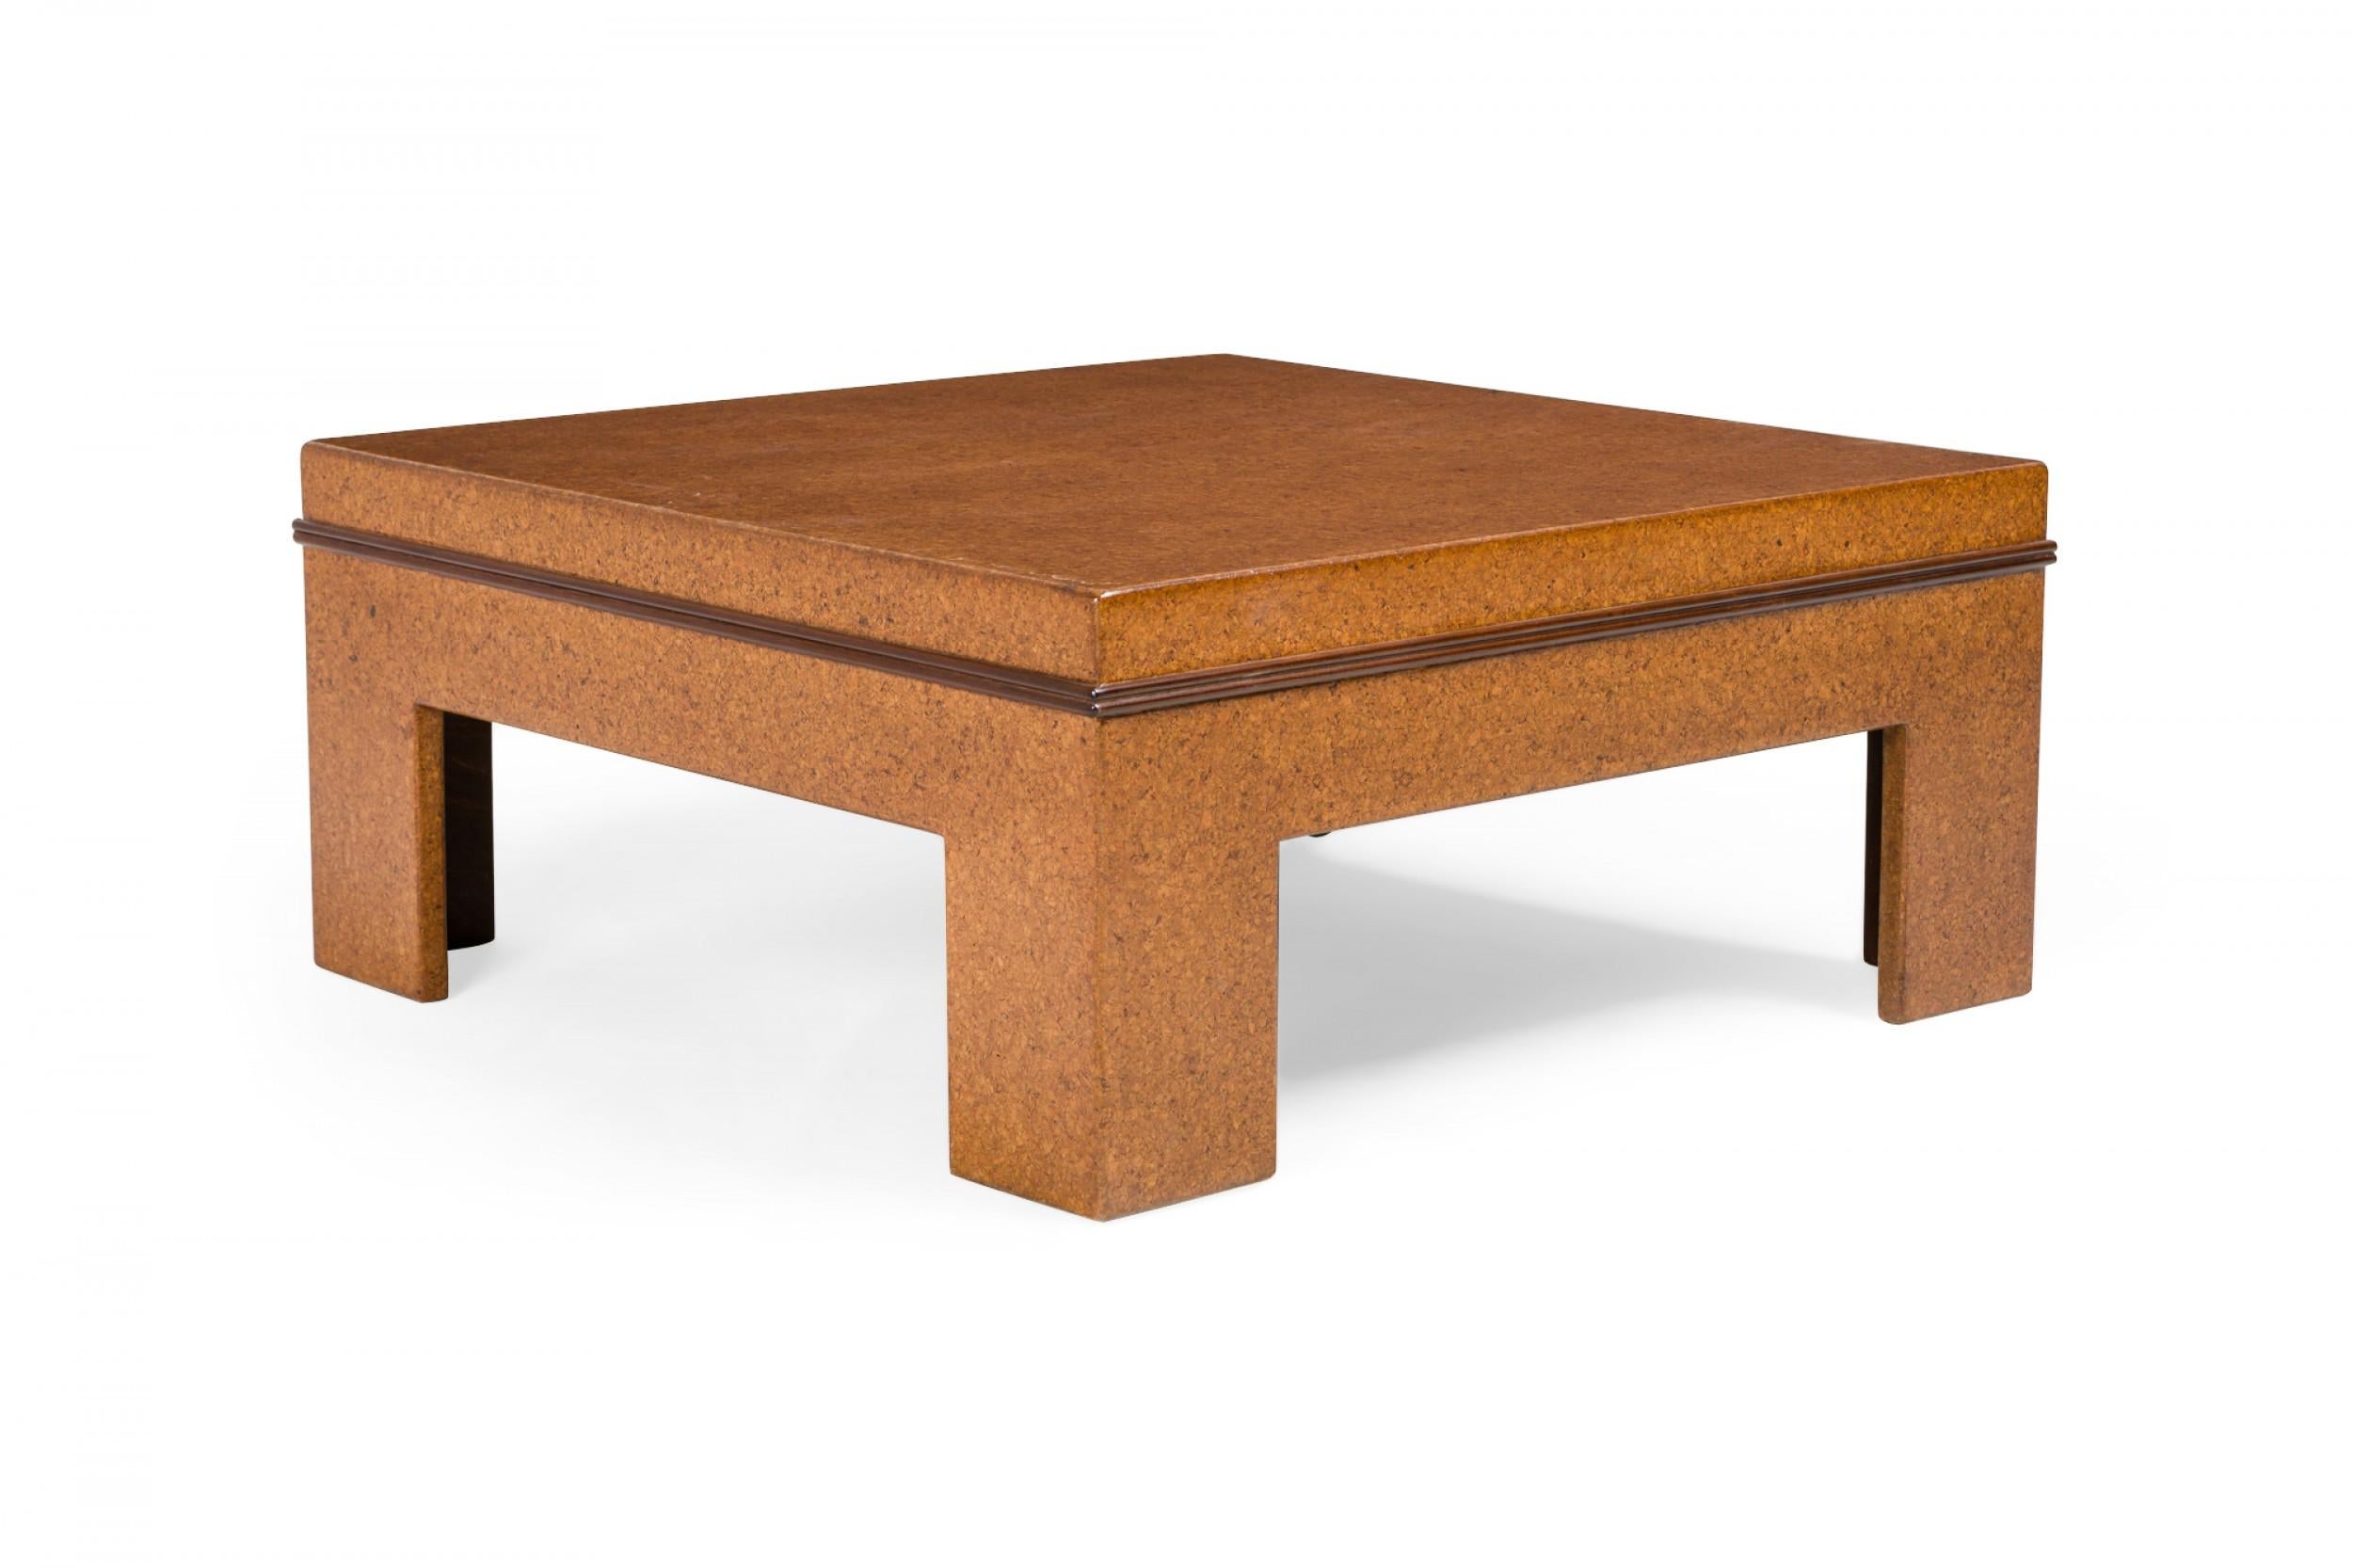 American mid-century square cocktail / coffee table with a cork top and cork veneer, resting on four squared legs. (PAUL FRANKL)